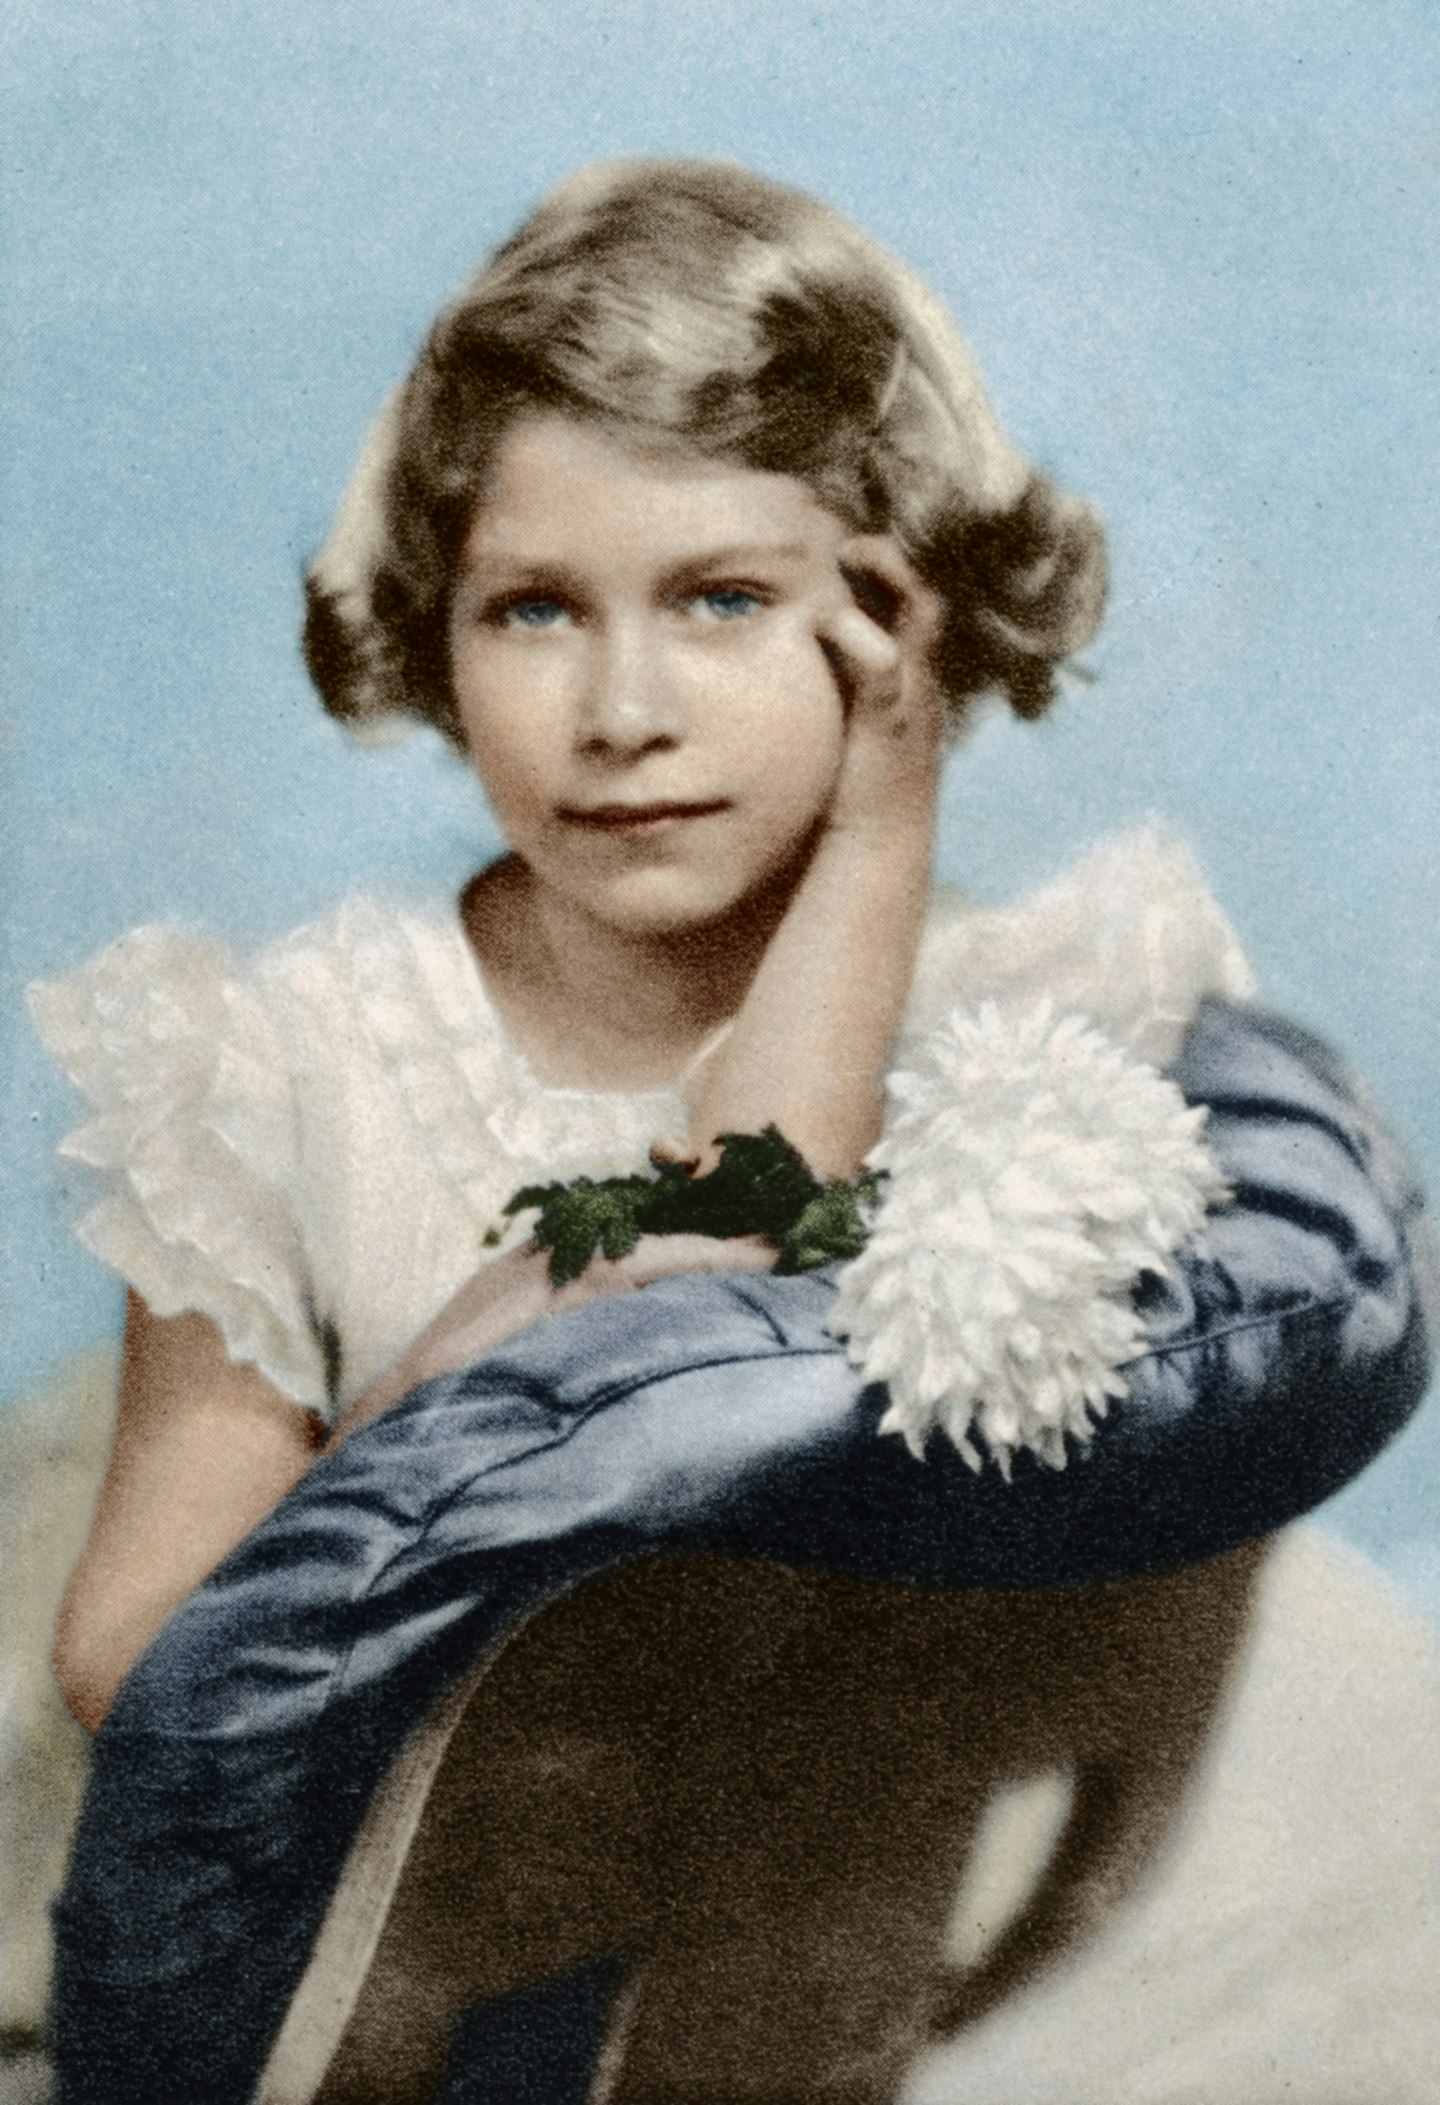 20 Pictures Of A Young Queen Elizabeth II: From A Toddler To A Young Woman